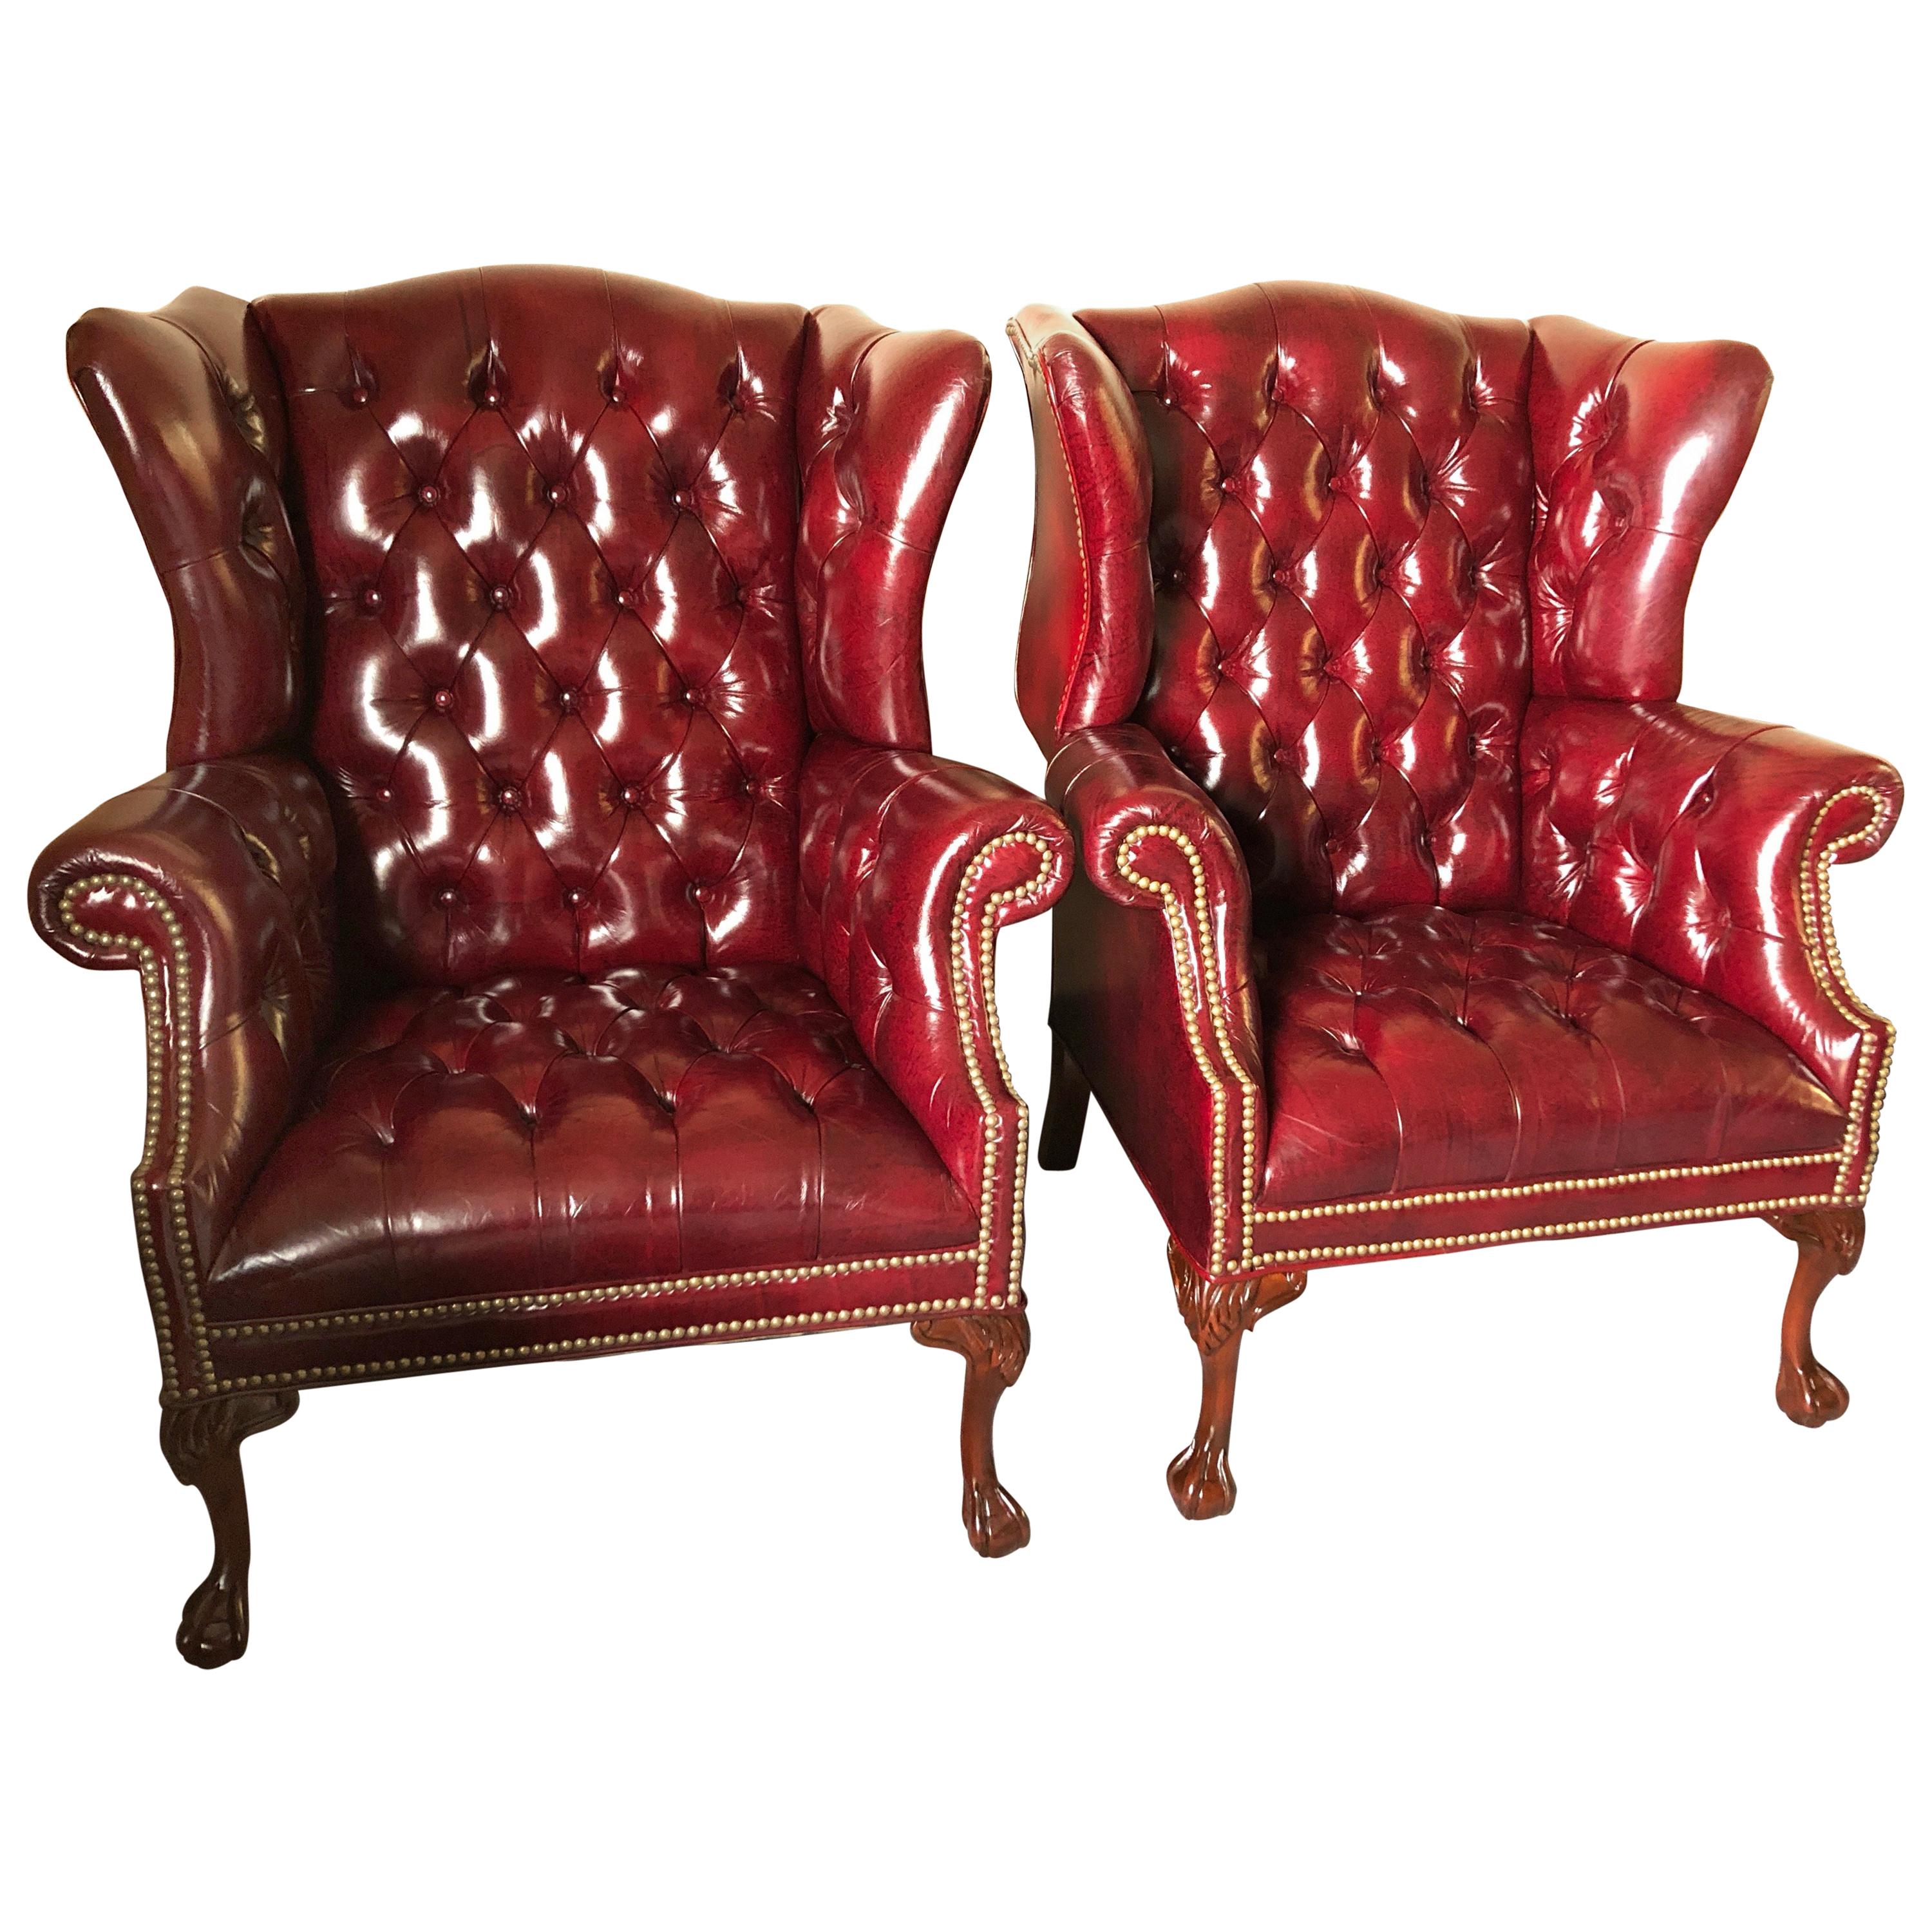 Pair of Rich Burgundy Leather Vintage Tufted Chesterfield Wing Chairs